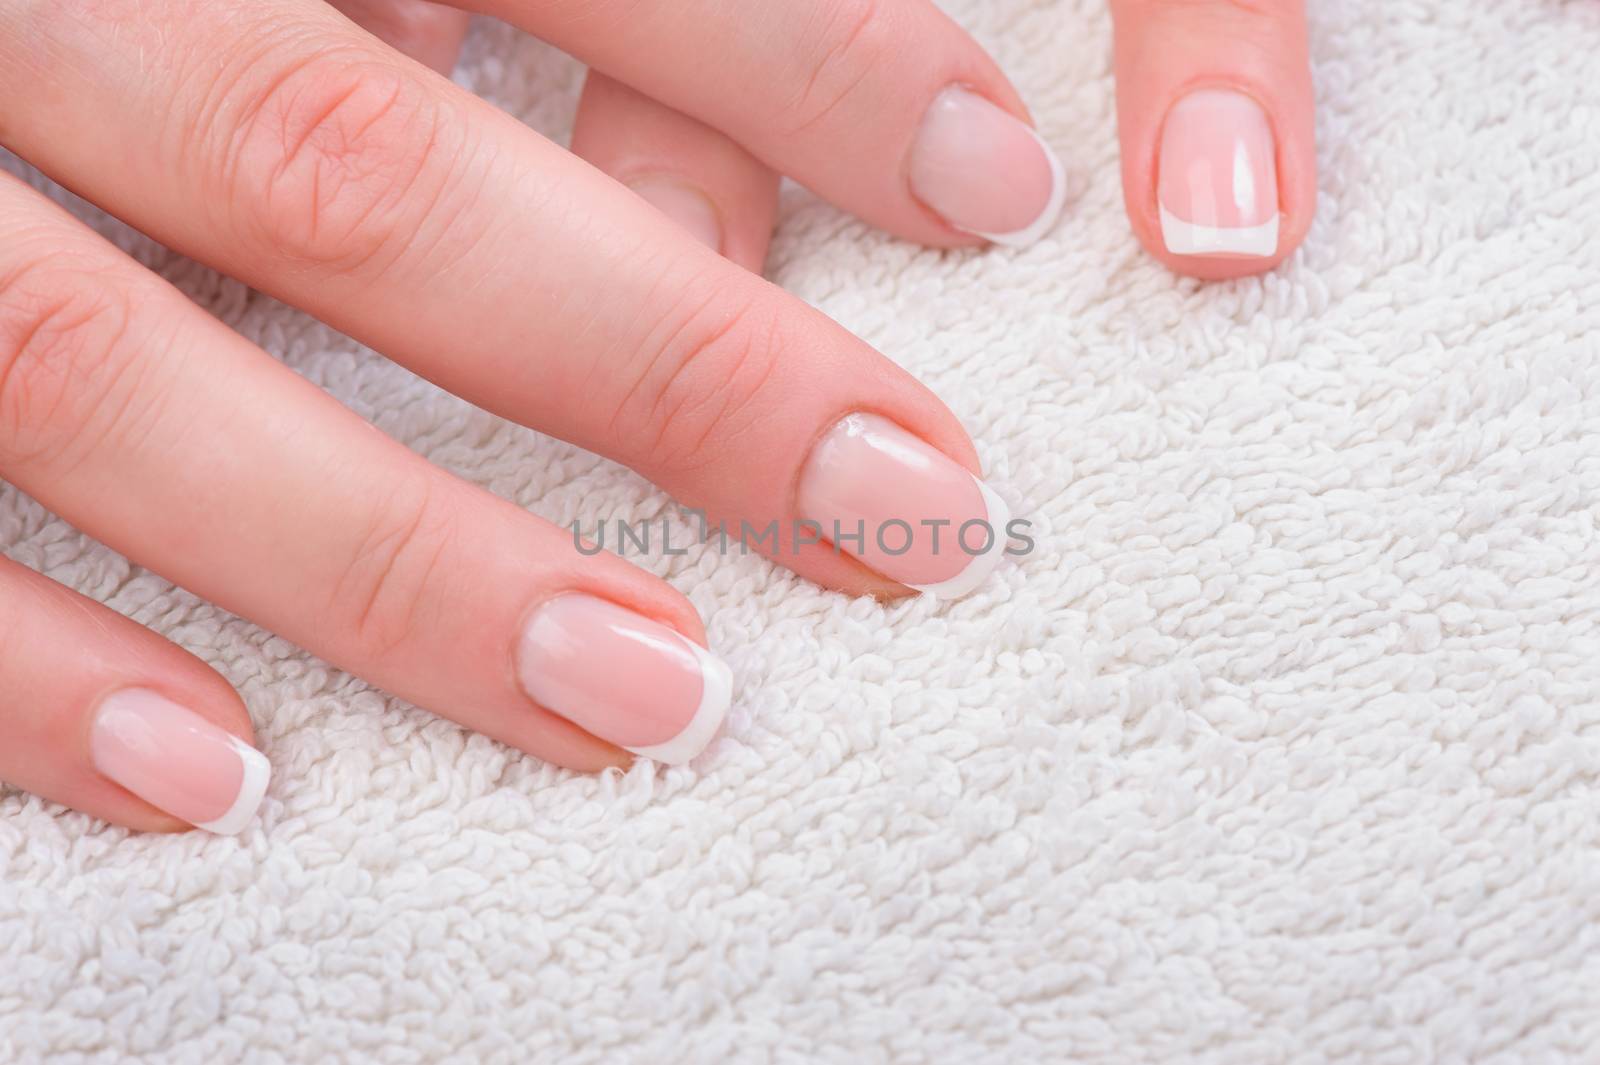 Fingers with french manicure by starush